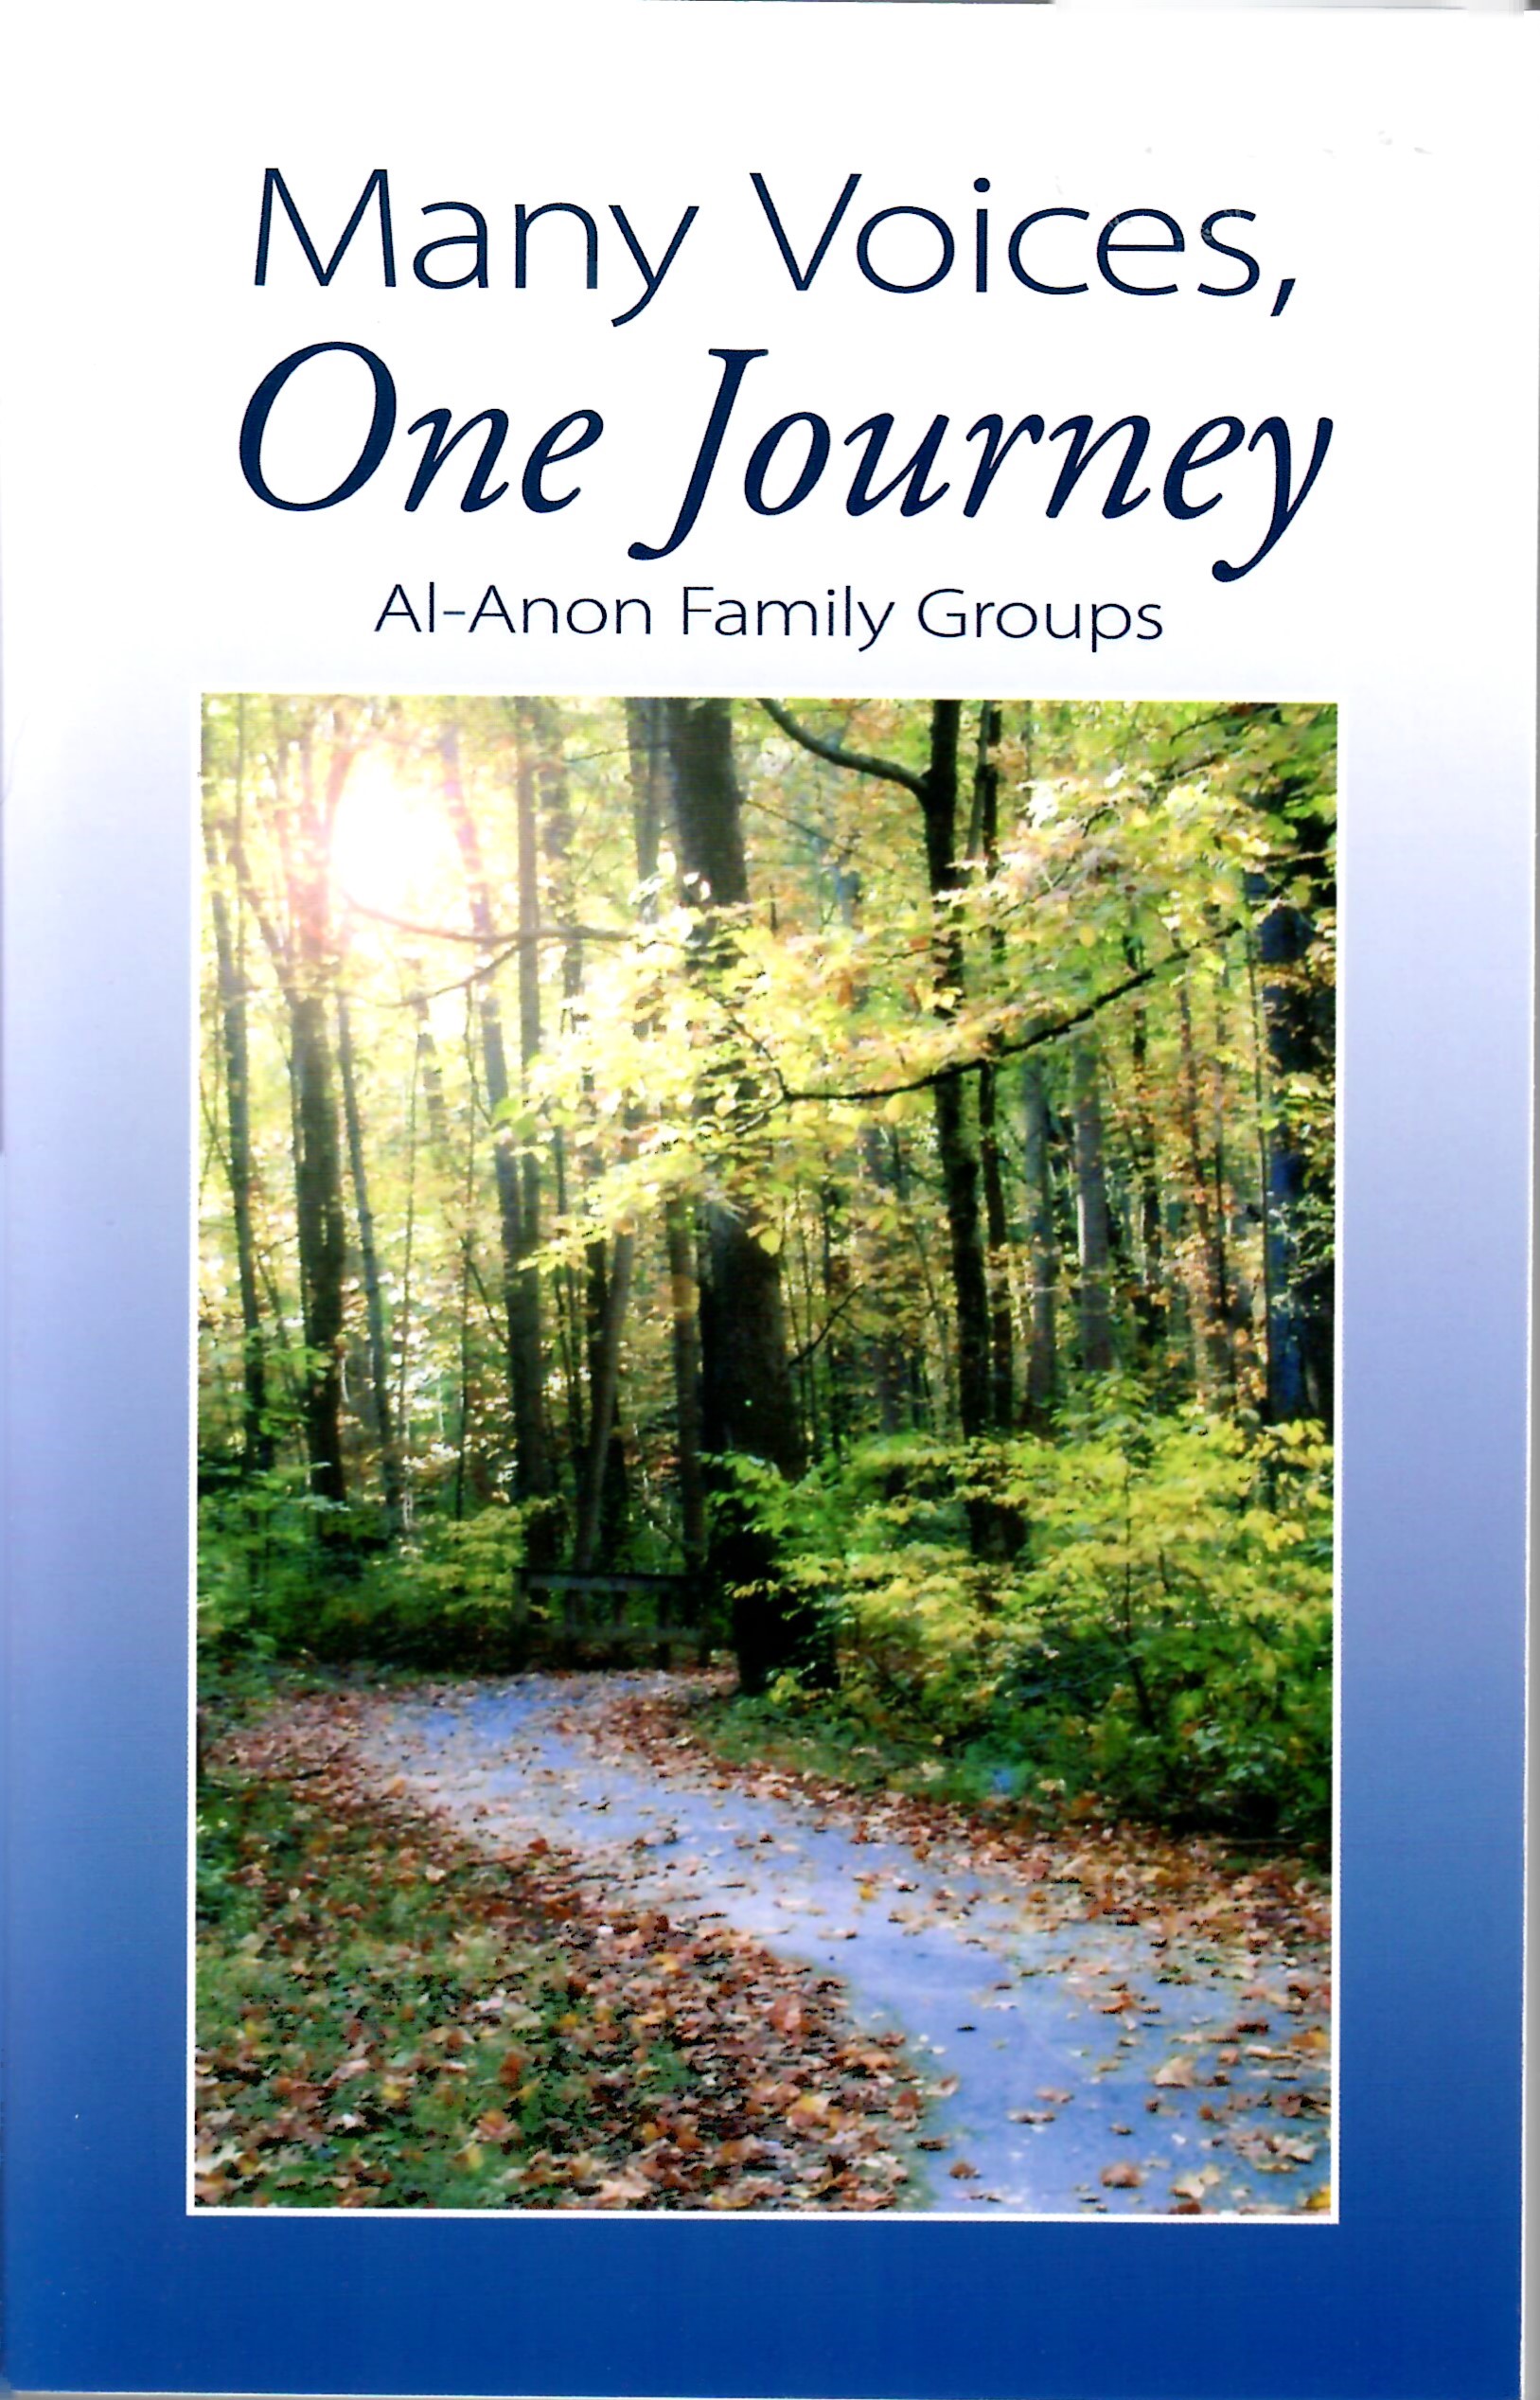 Many Voices, One Journey: Al-Anon Family Groups (Softcover) B-31